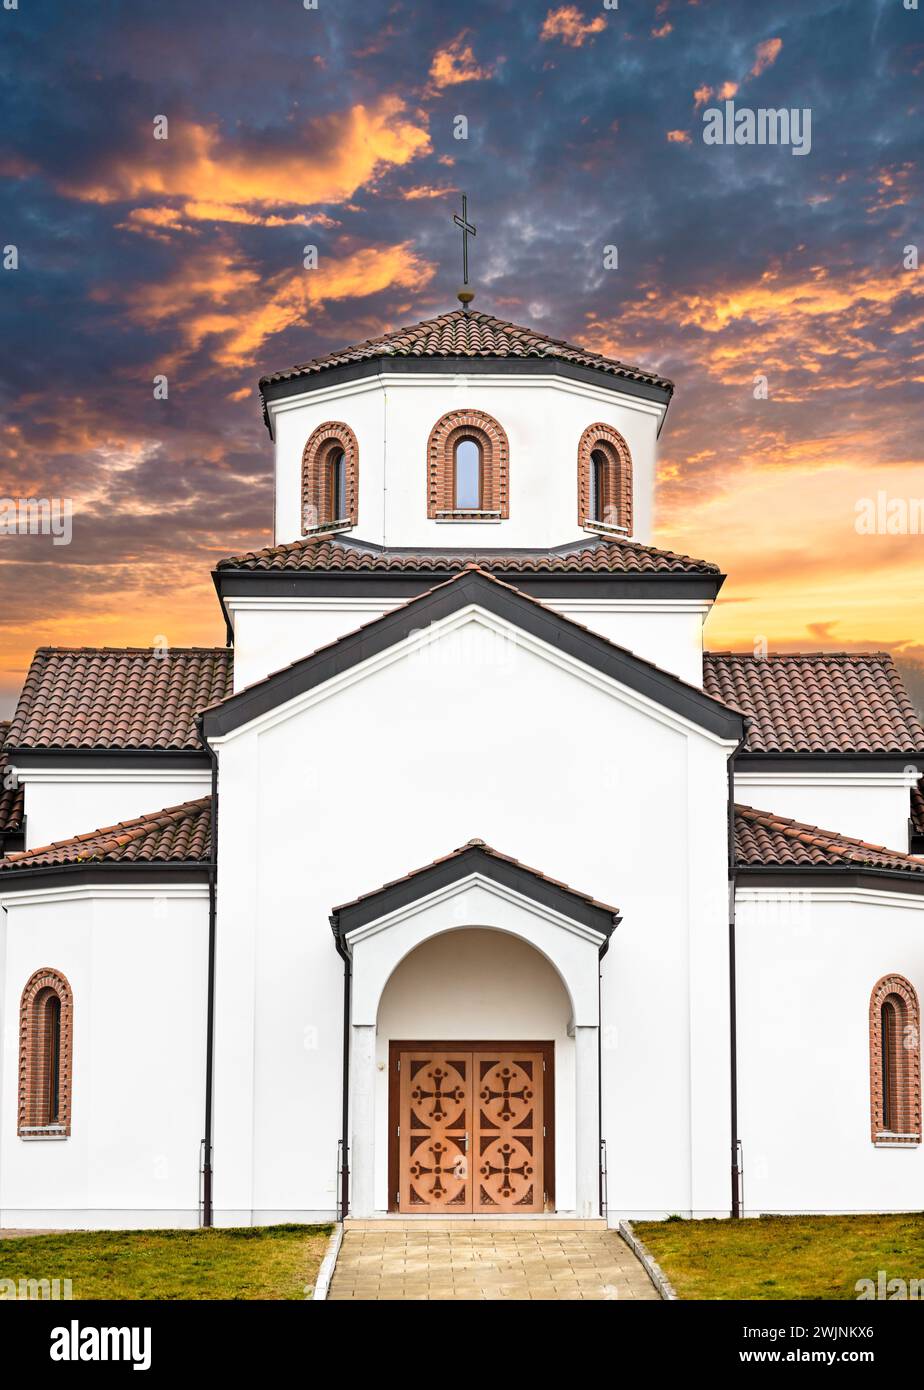 A church at sunset with prominent bell tower and arched entrances Stock Photo